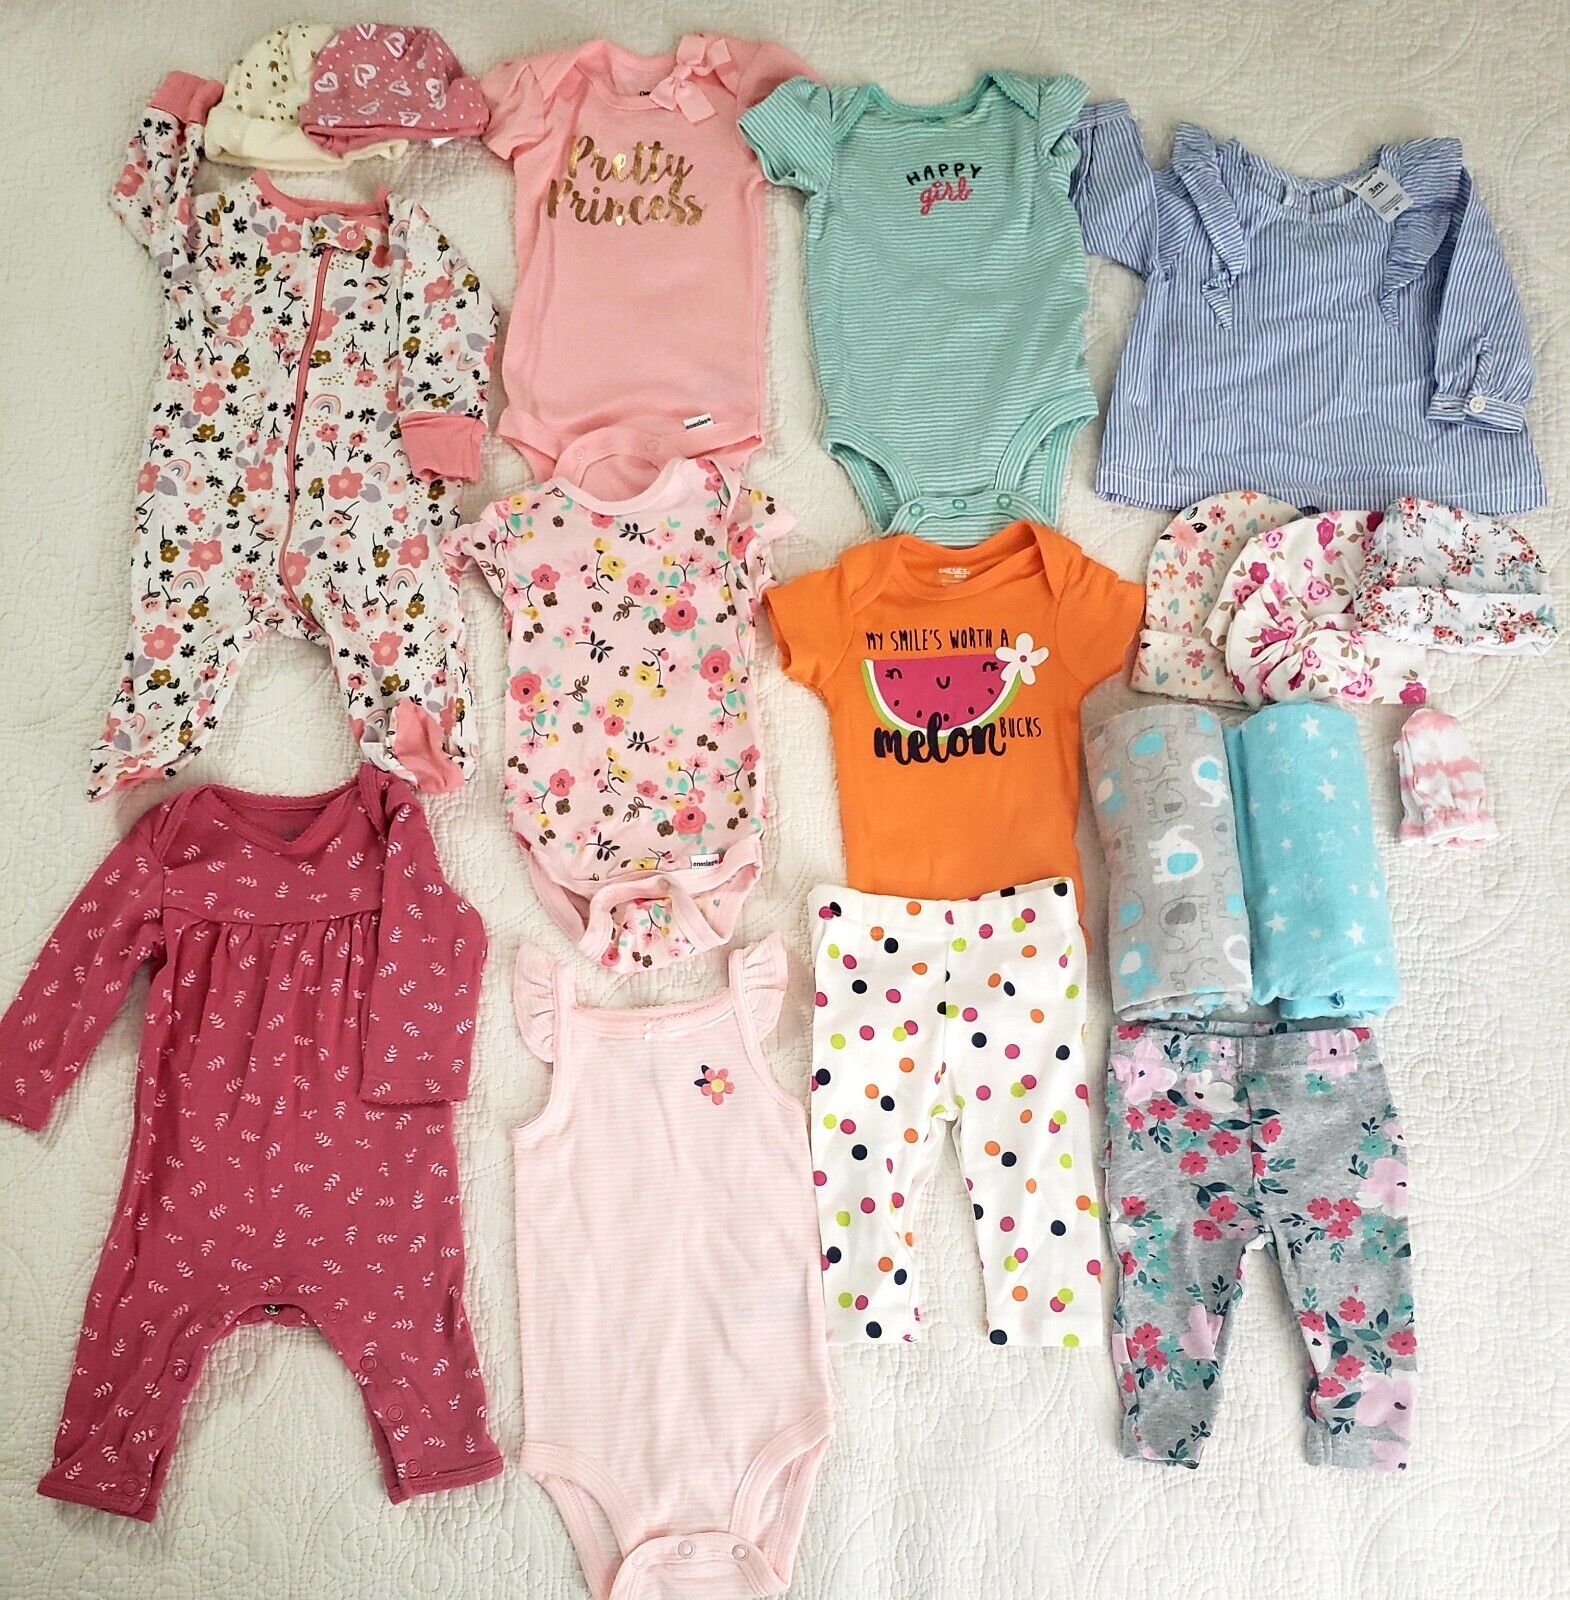 BABY GIRL'S Clothes Lot of 18 PCS Sizes 0 to 3 Months, Hat and Blankets A-16 Carter, Old Navy, Onesies, Little Beginnings, Gerber